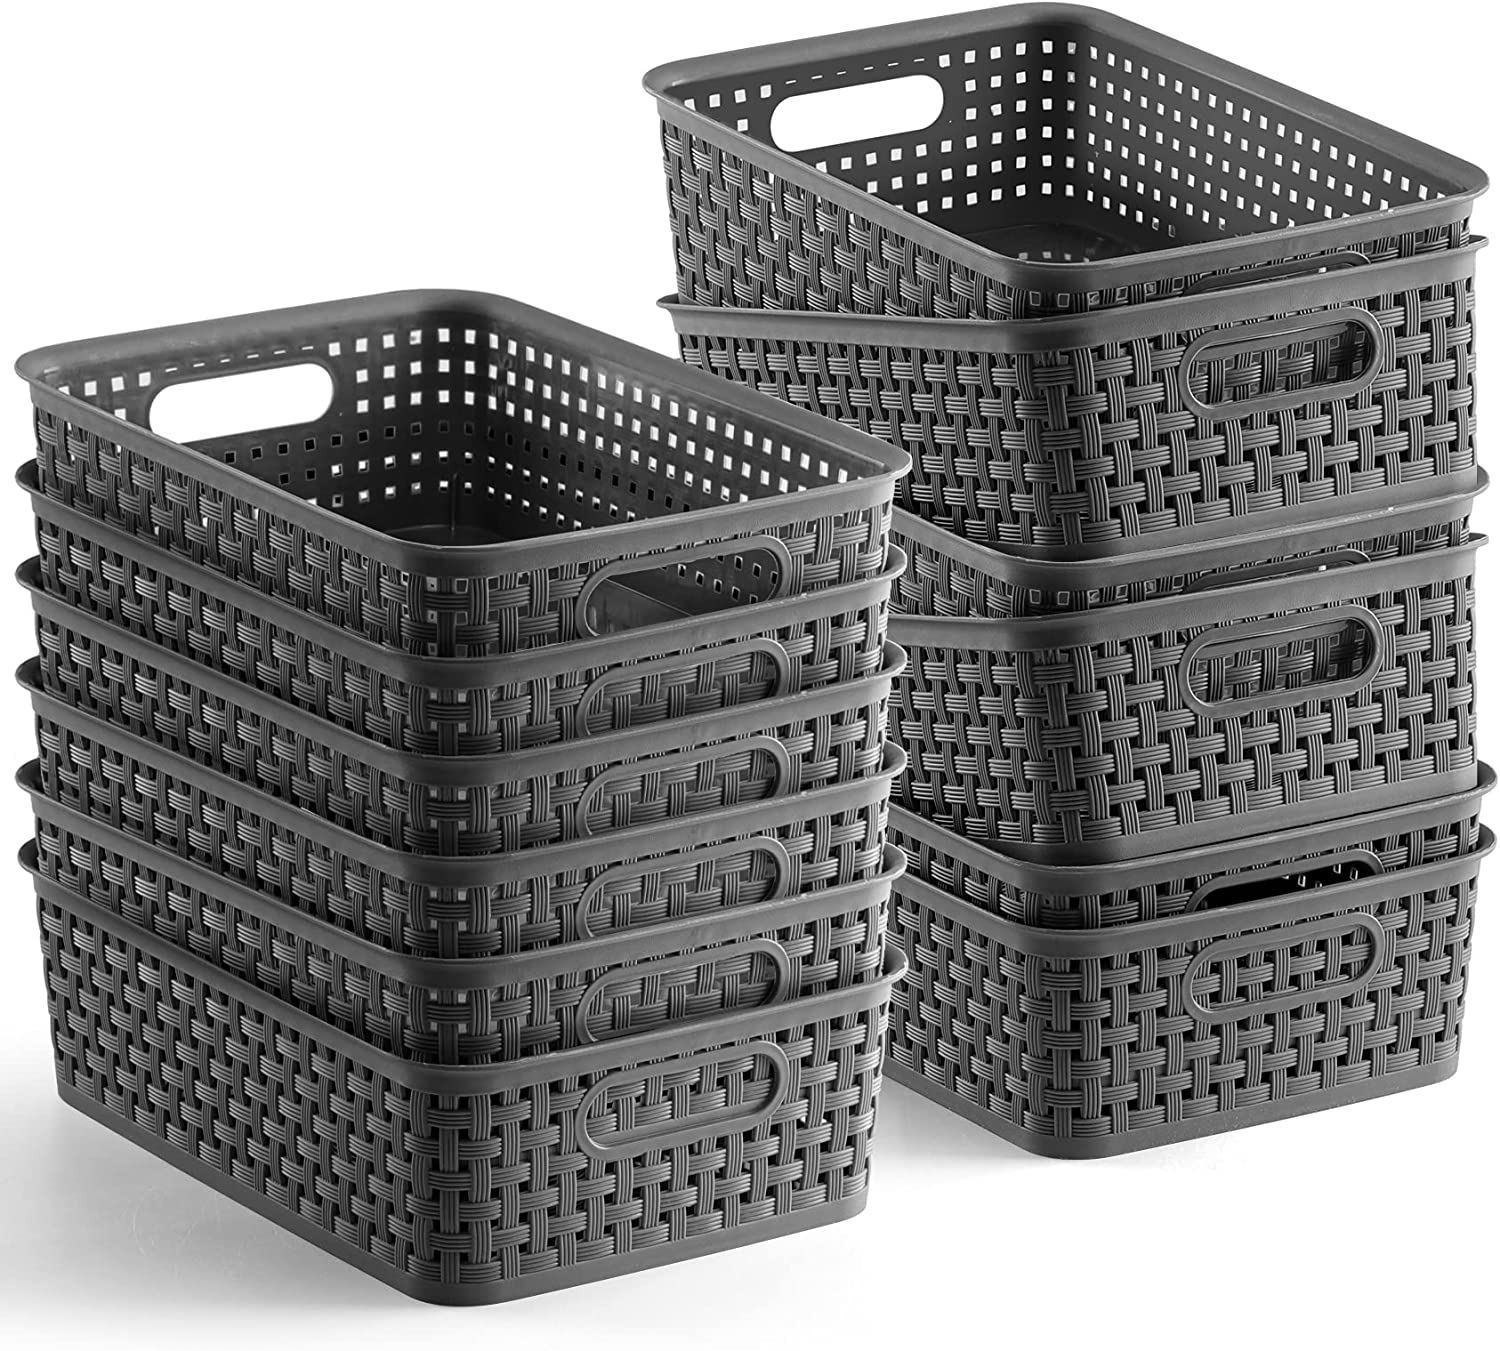 SANNO 14 Stackable Baskets Pantry Bins Storage Baskets Metal Wire Basket,  Storage Organizer Basket Open Front for Kitchen Cabinets, Pantry, Closets